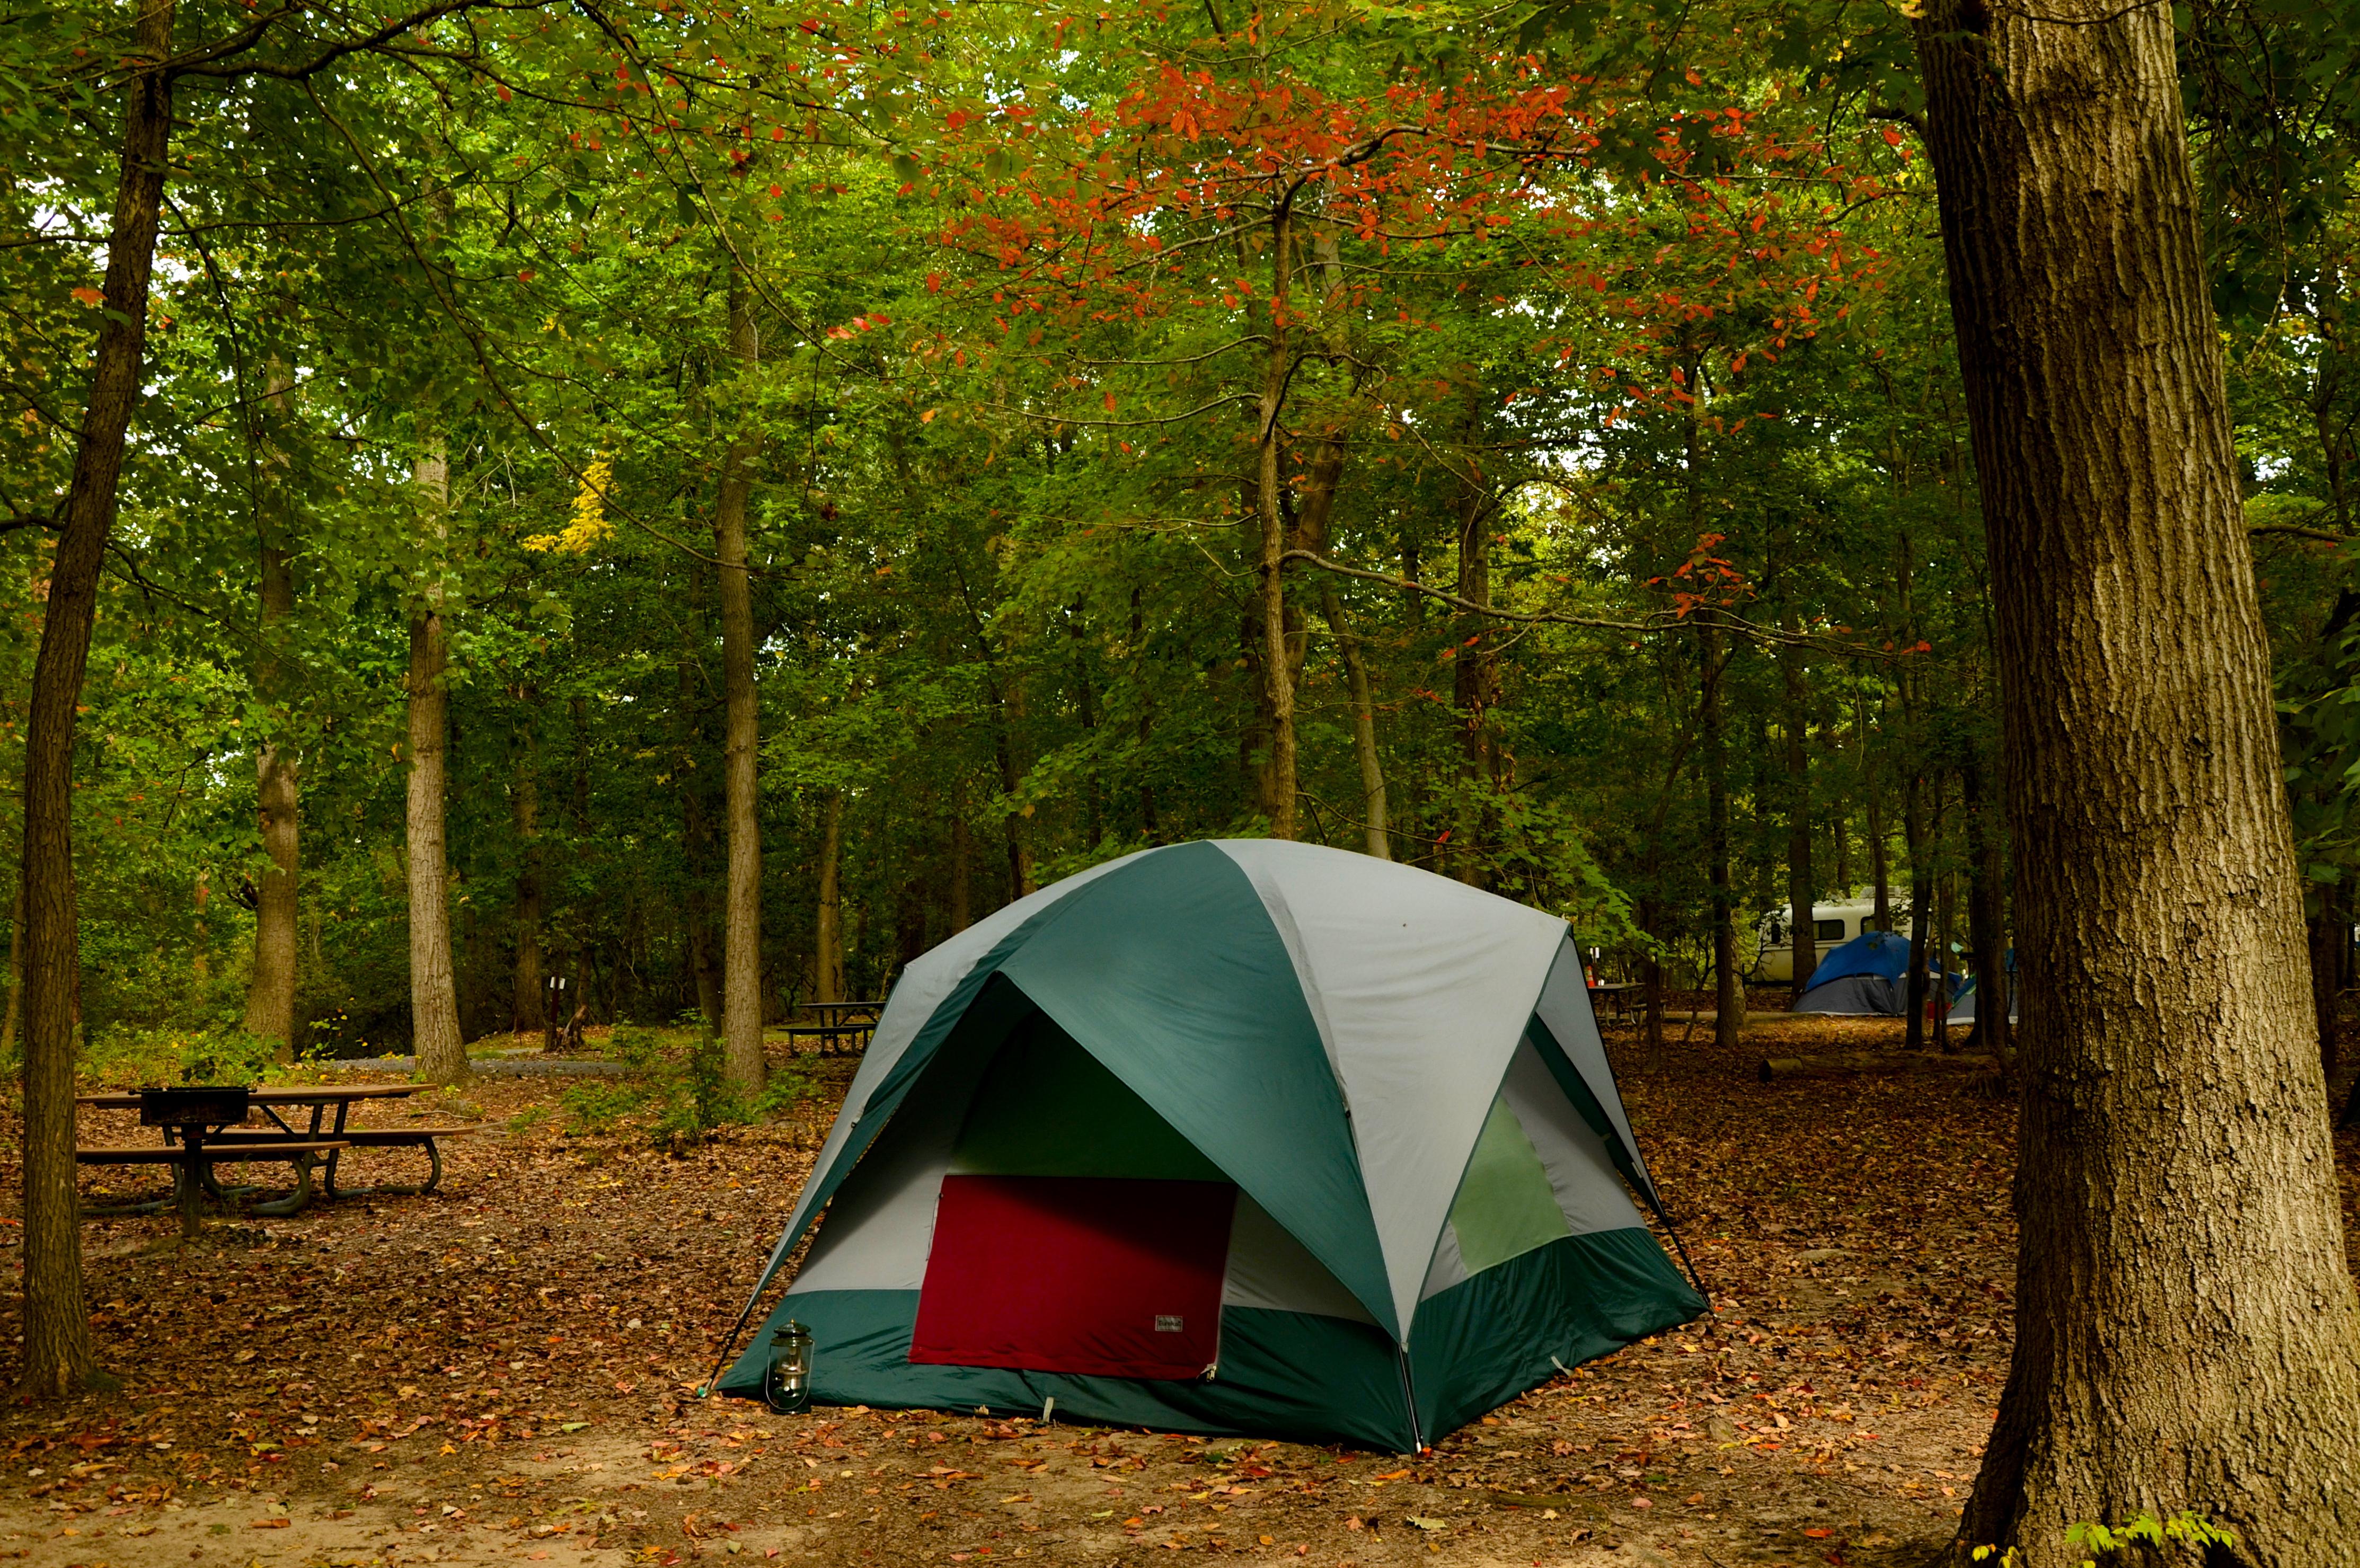 Tent in the Greenbelt Park campground